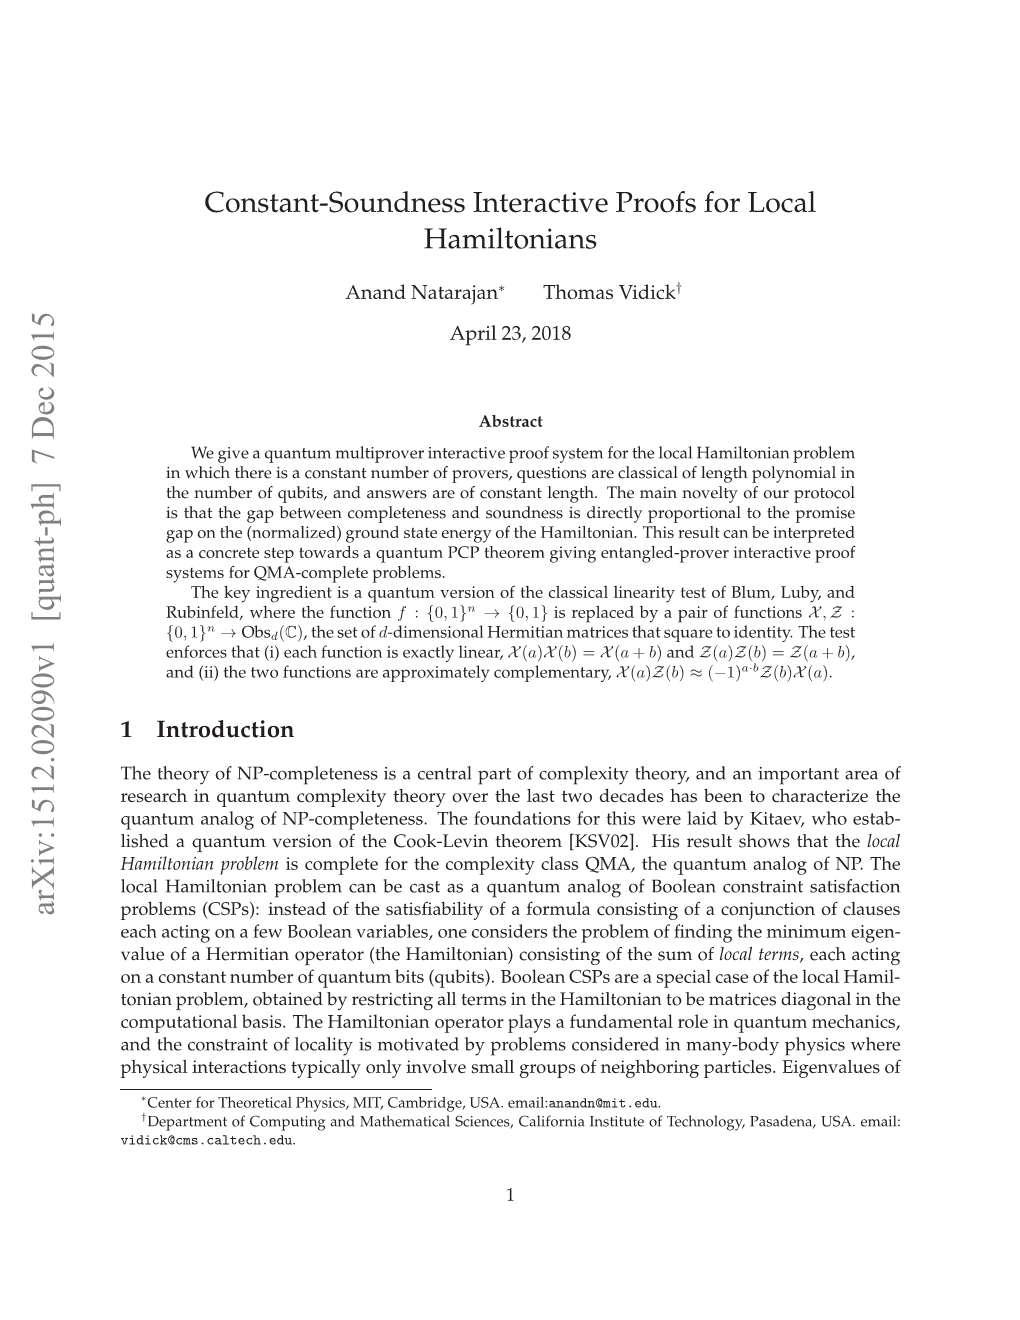 Constant-Soundness Interactive Proofs for Local Hamiltonians